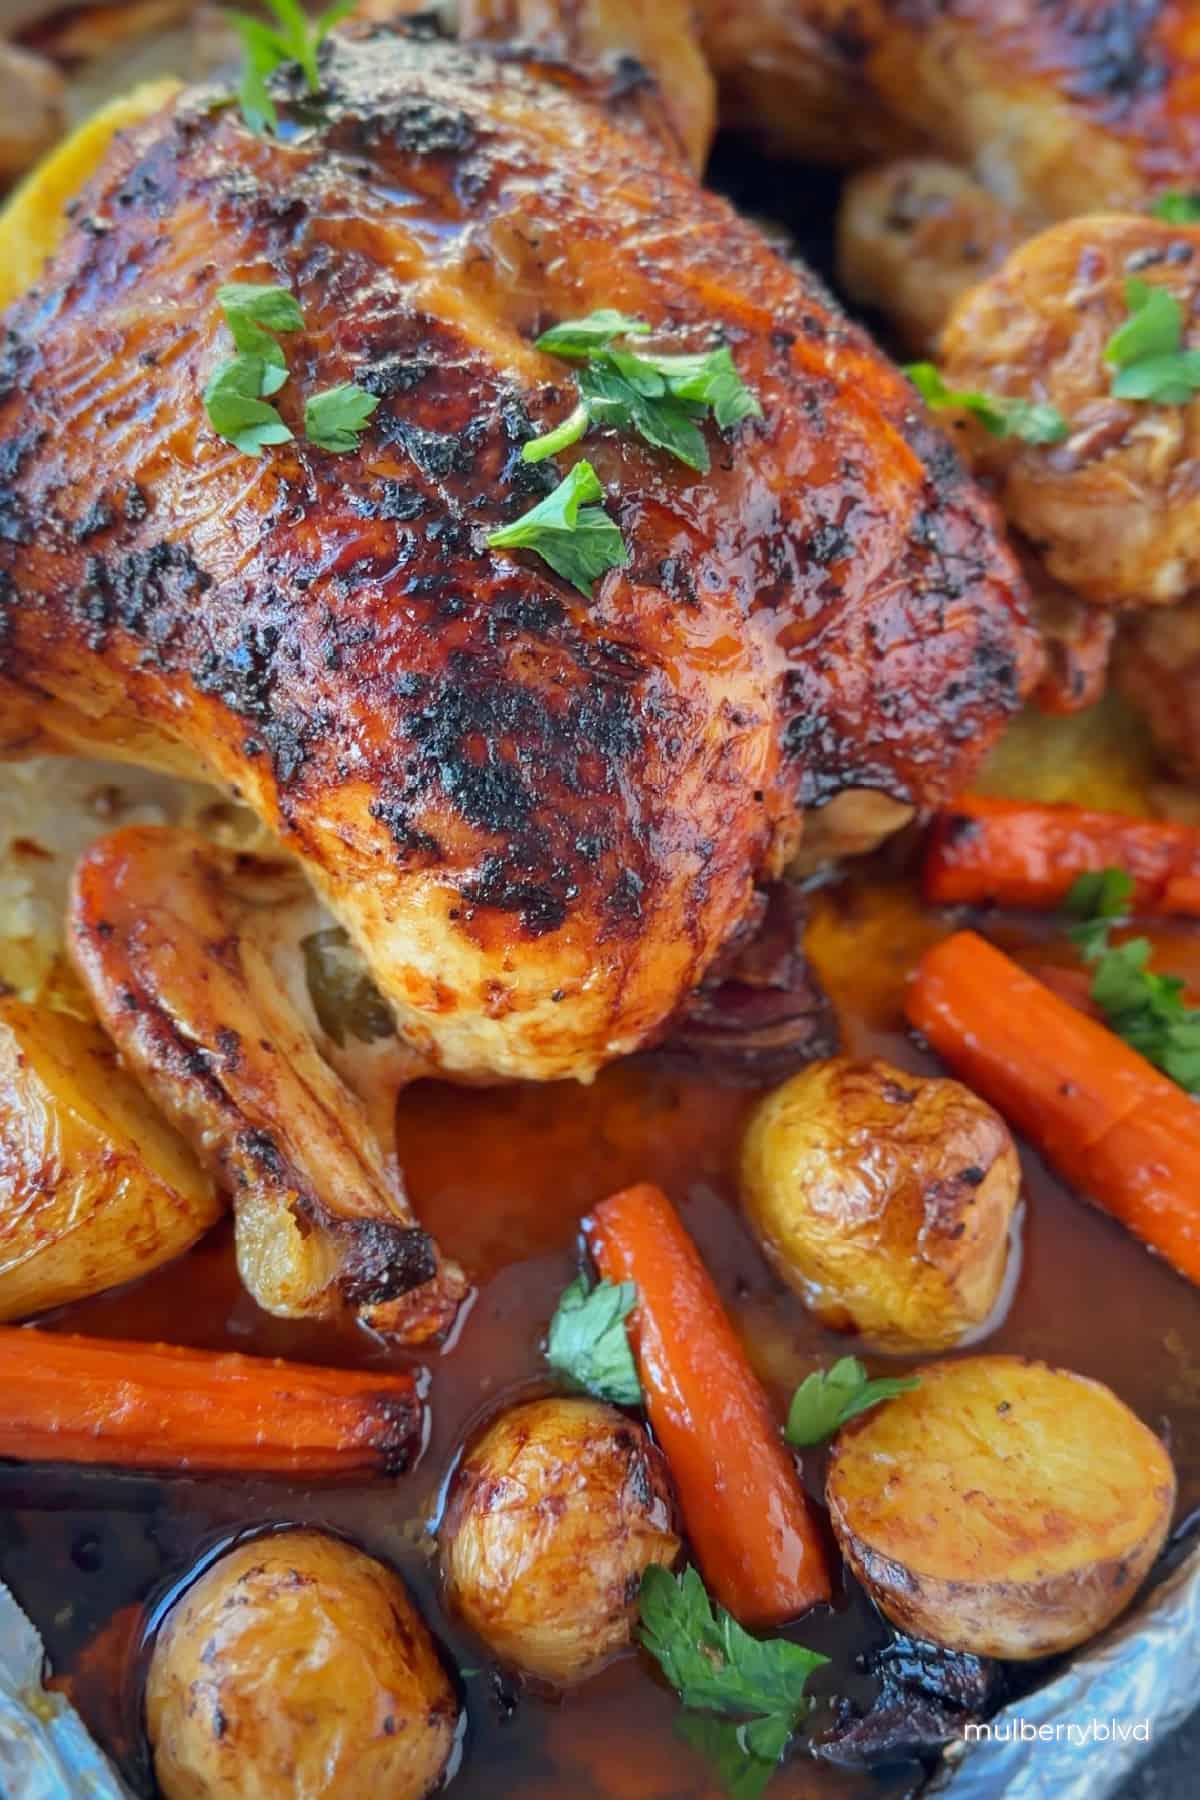 an image with a roasted chicken with parsley garnish on top, all on a sheet pan with roasted carrots, potatoes and garlic